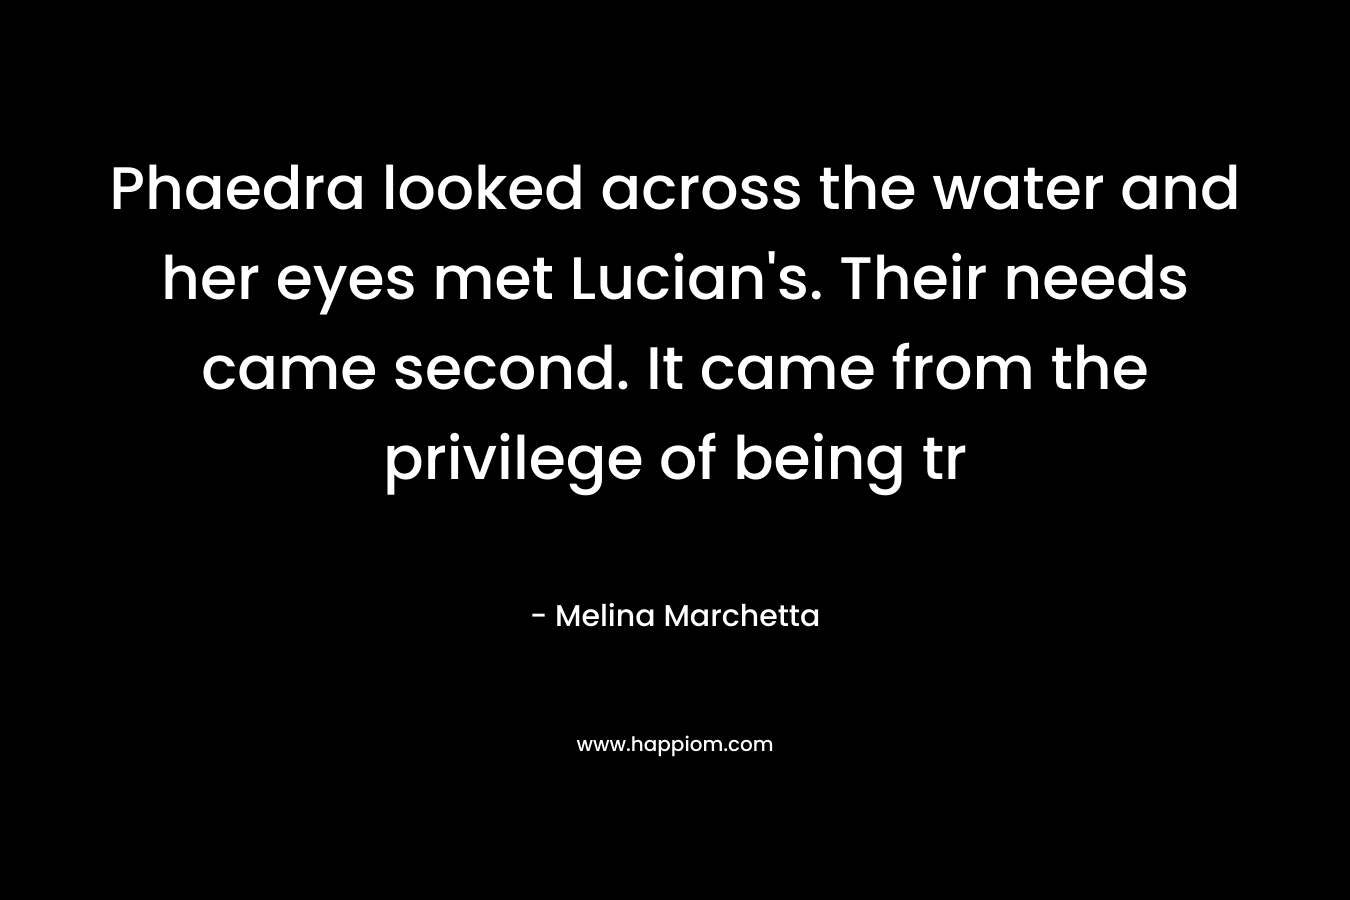 Phaedra looked across the water and her eyes met Lucian's. Their needs came second. It came from the privilege of being tr